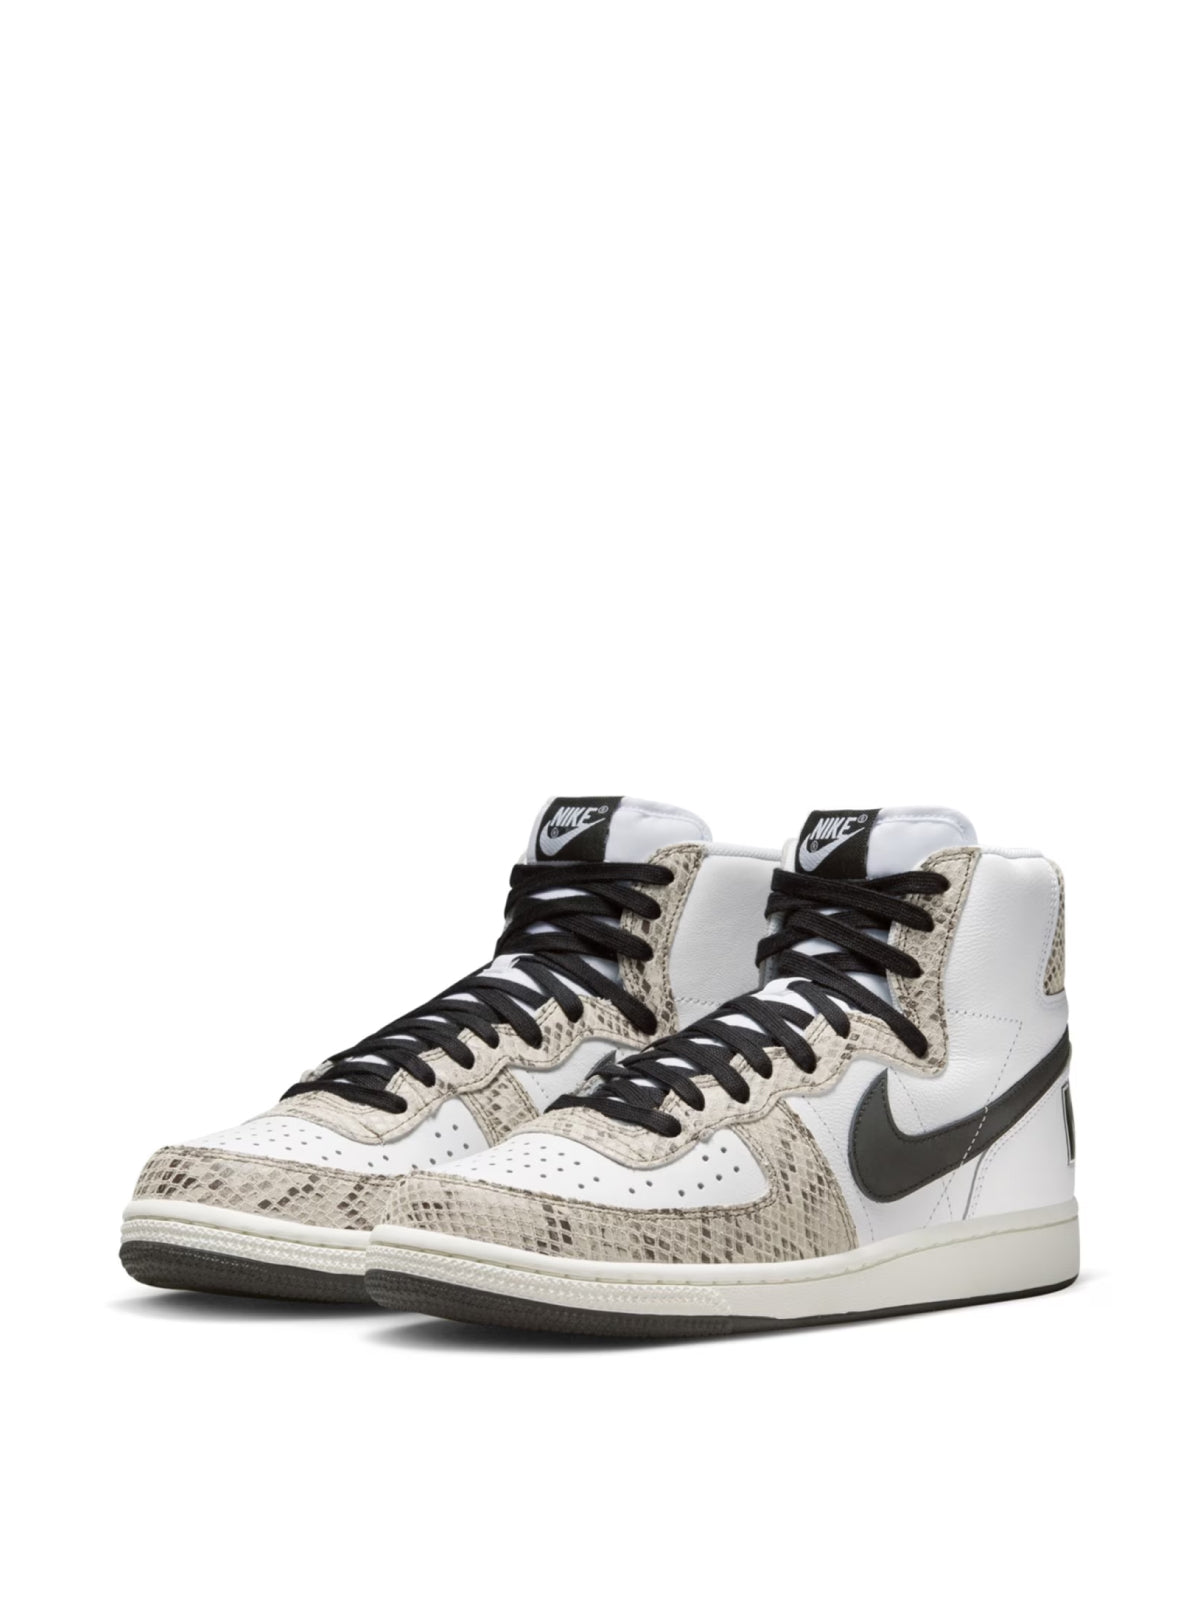 Nike-OUTLET-SALE-Terminator High Cocoa Snake Sneakers-ARCHIVIST